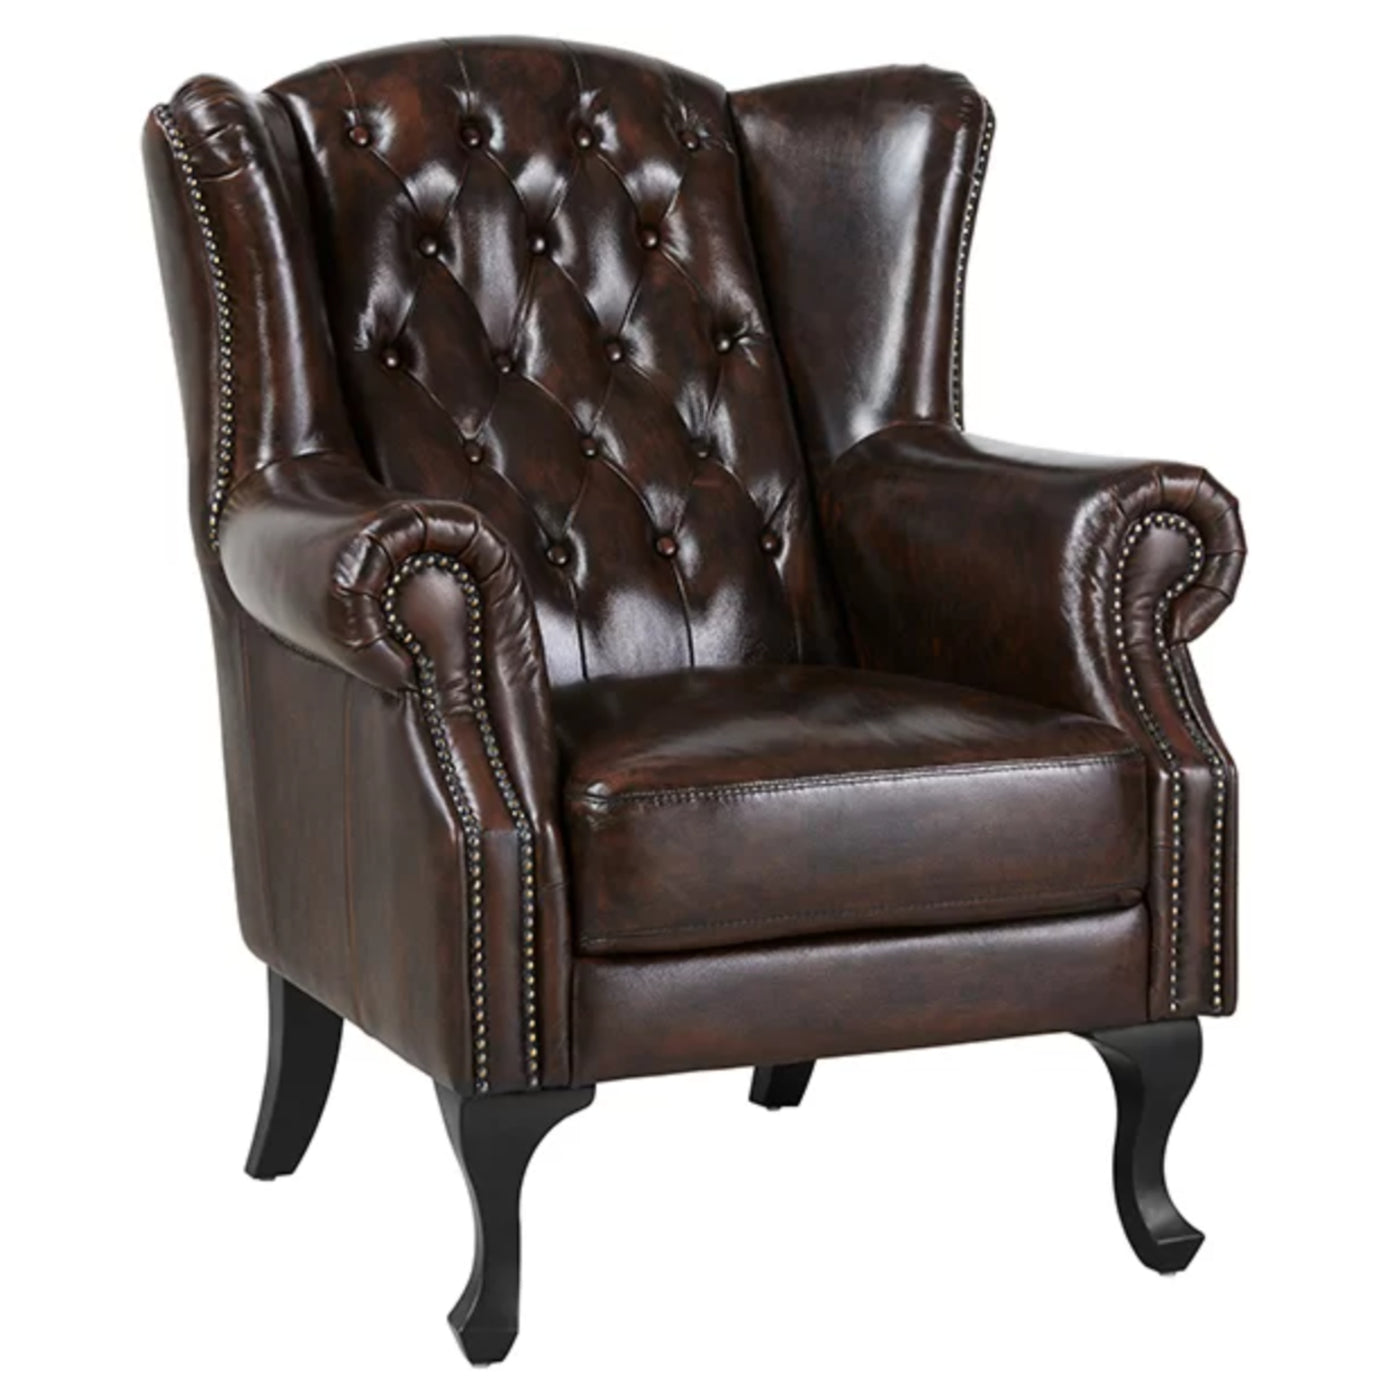 Max Chesterfield Winged Armchair Ottoman Footstool Sofa Leather Antique Brown